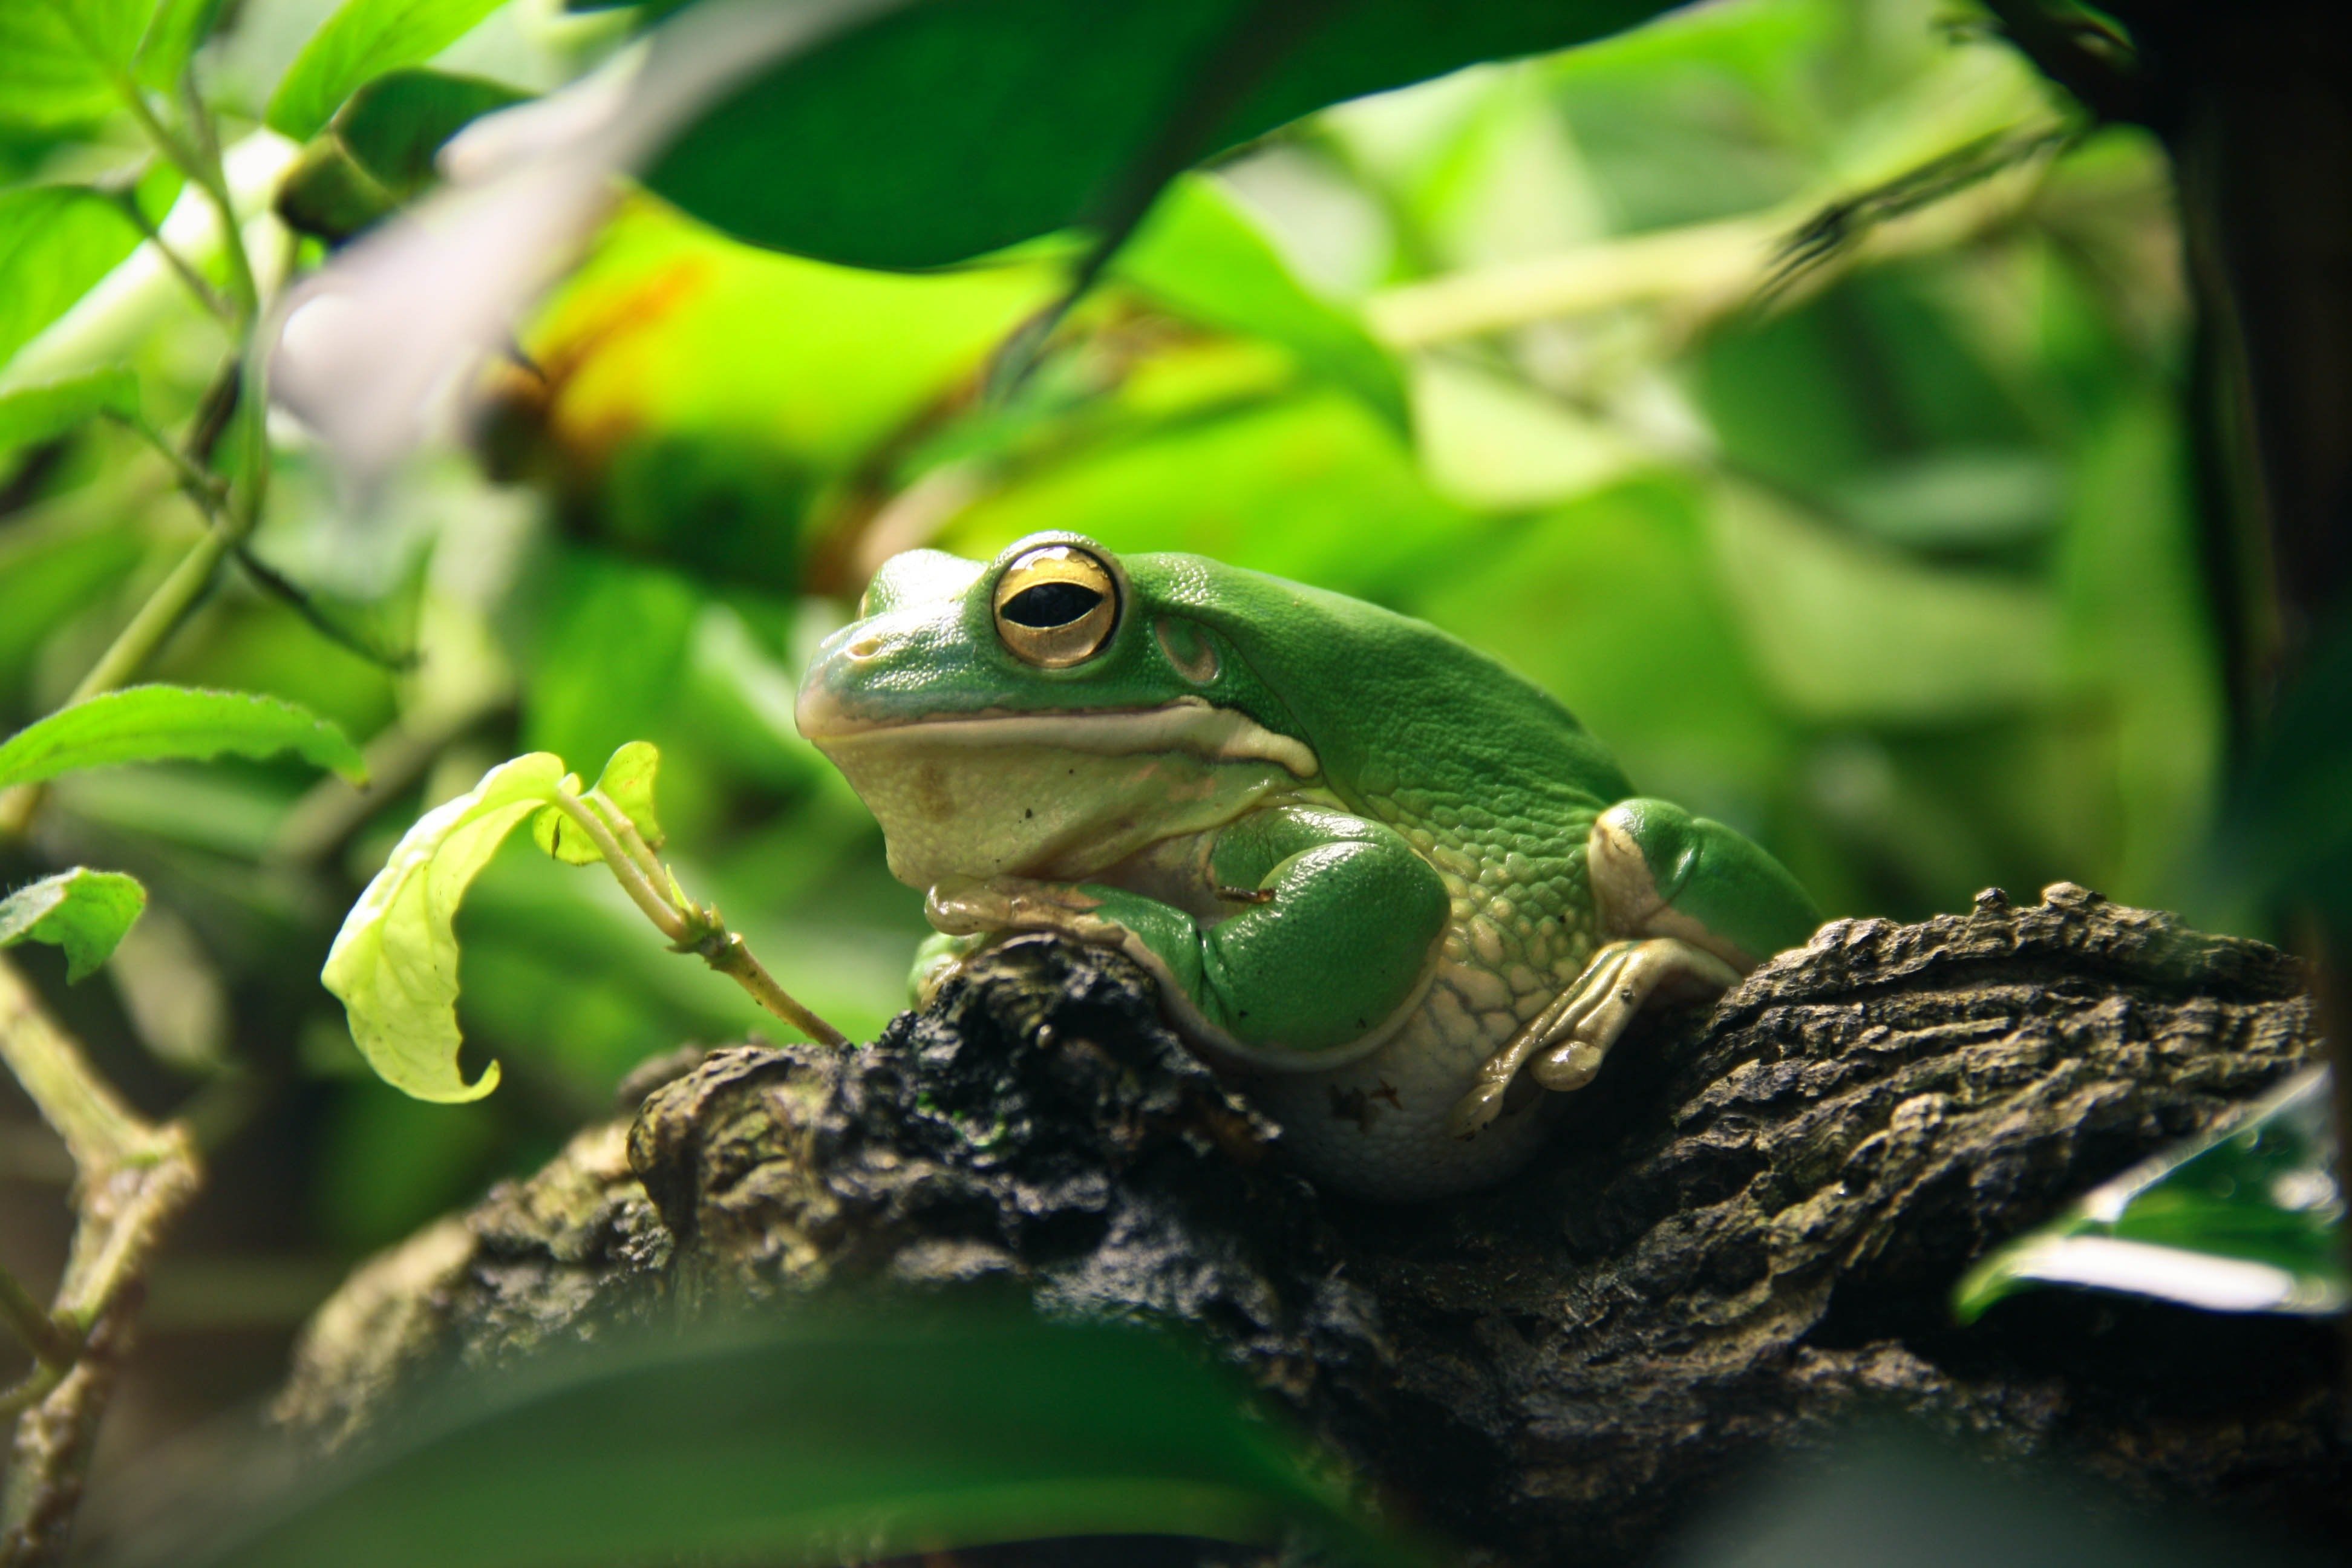 Pictured - A green and white frog resting on a brown tree branch | Source: Pexels 